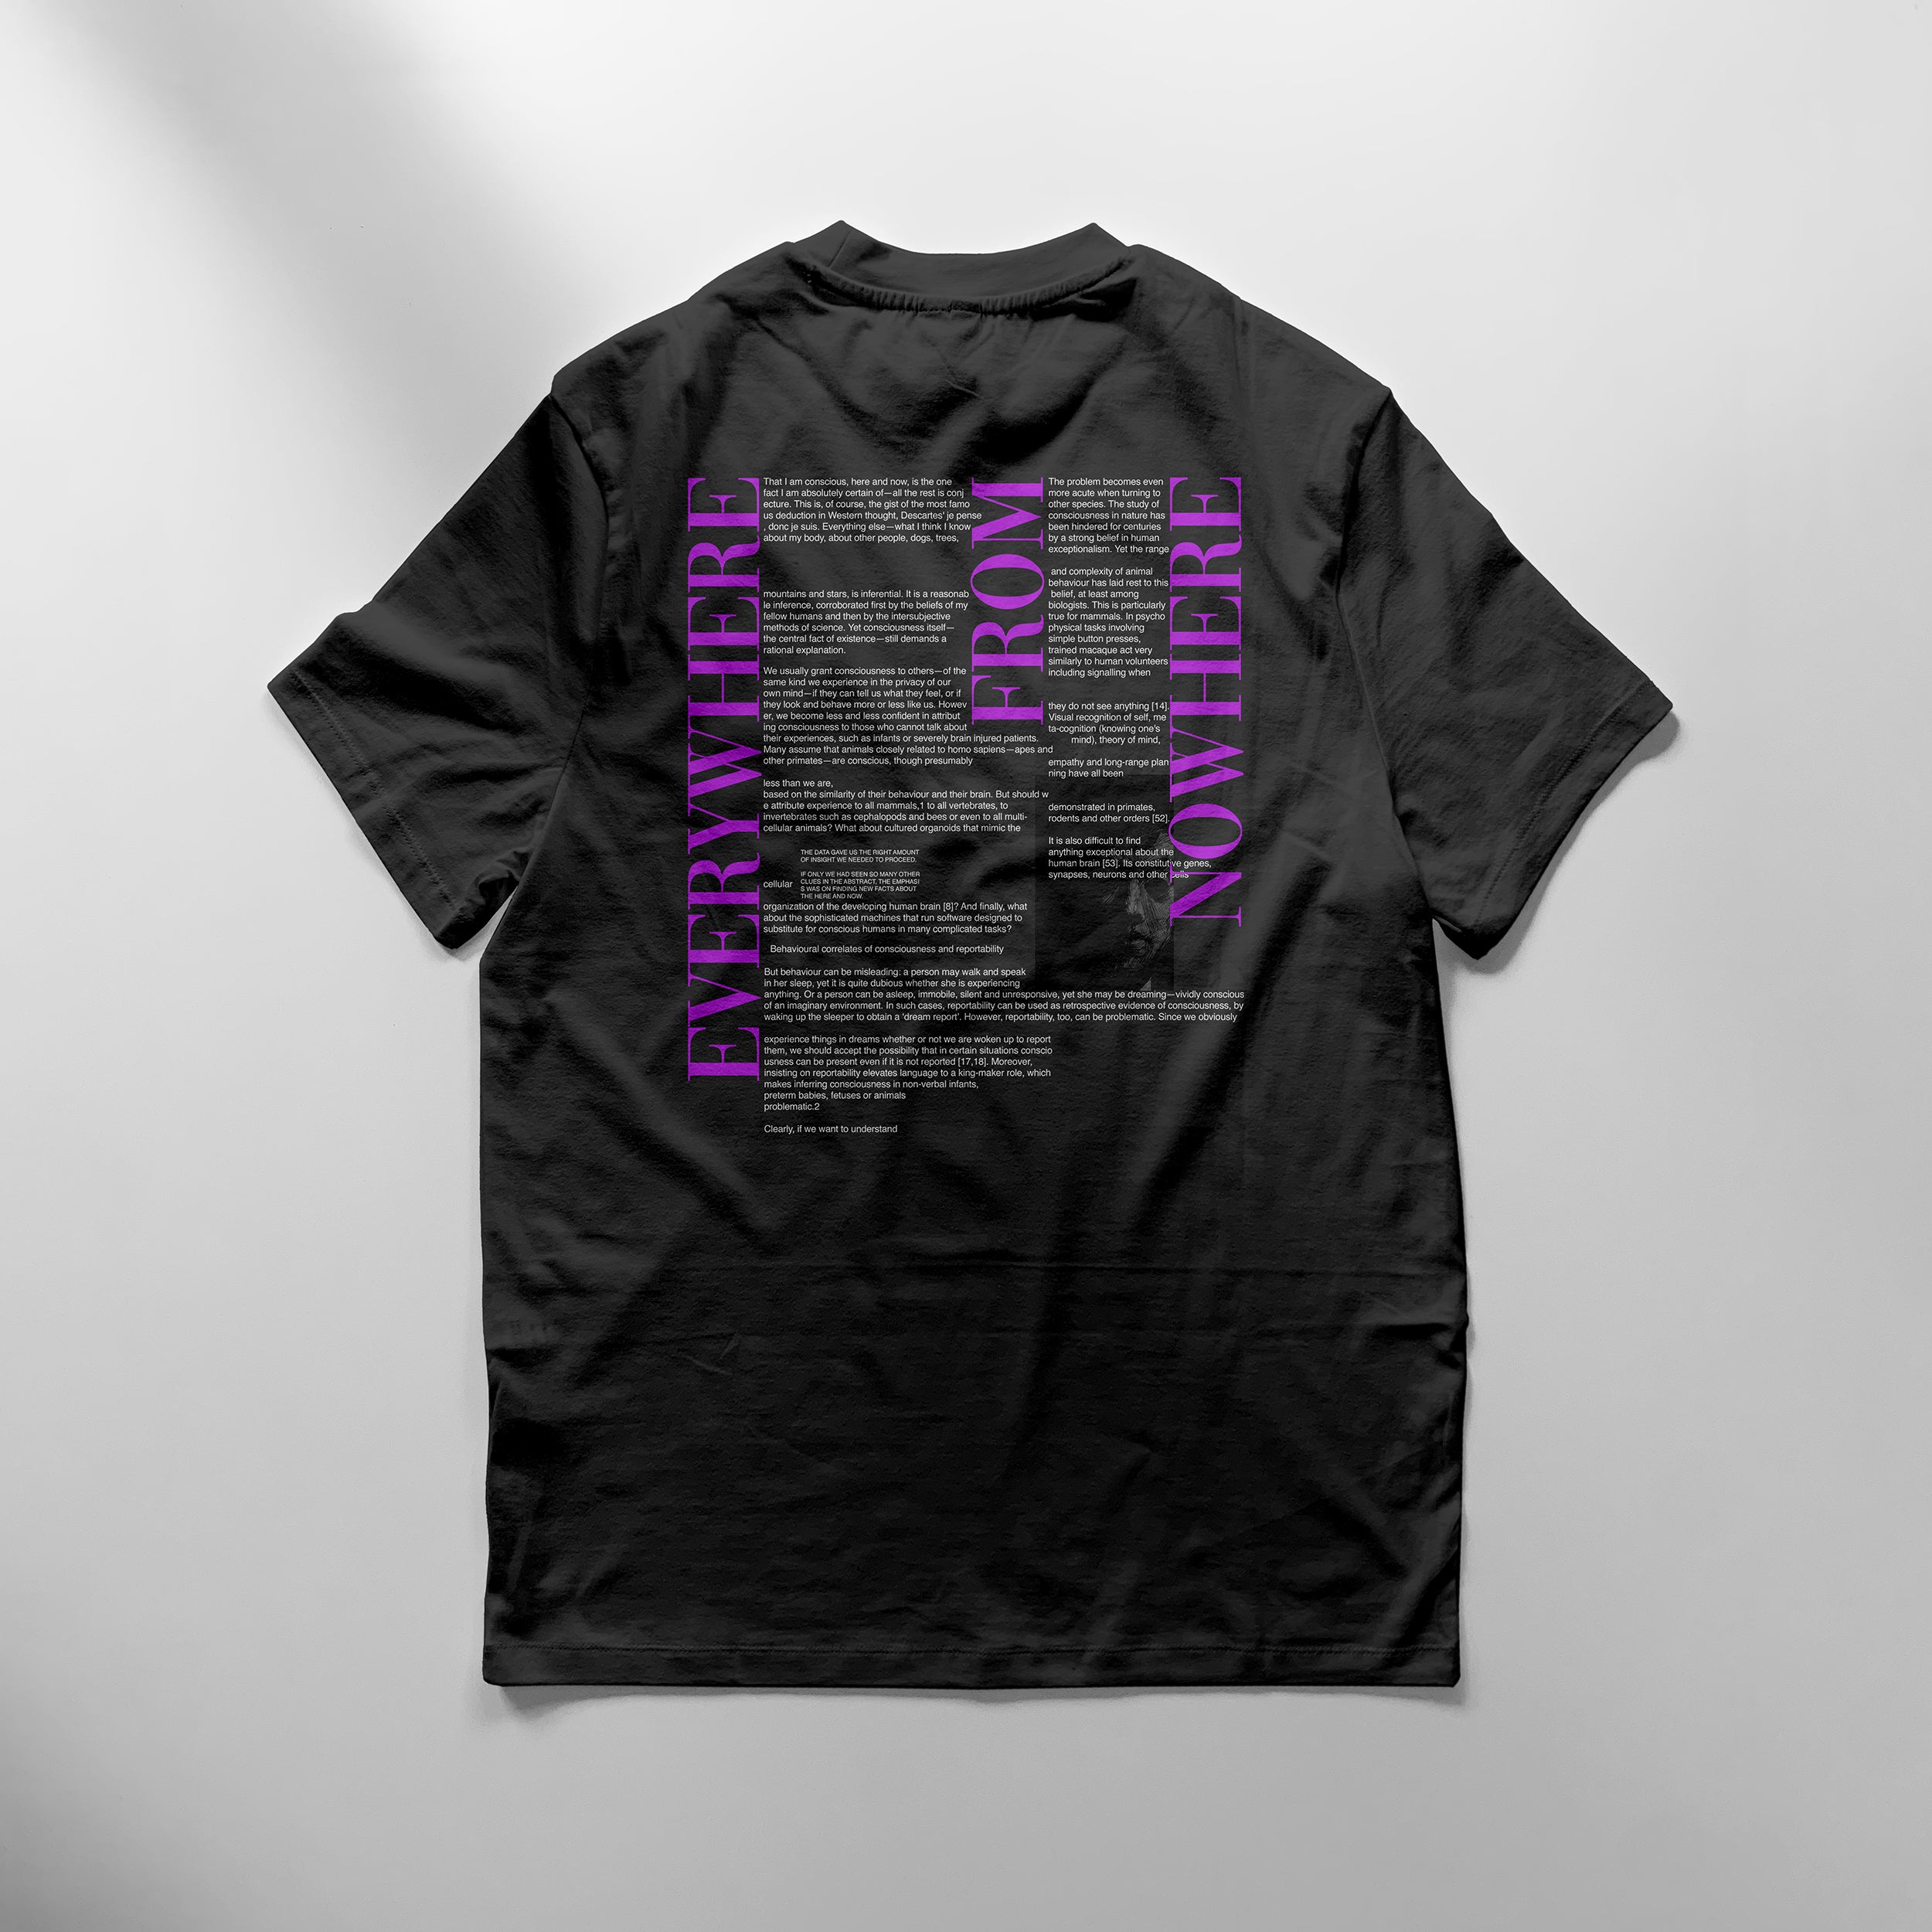 The Hypothesis T-Shirt